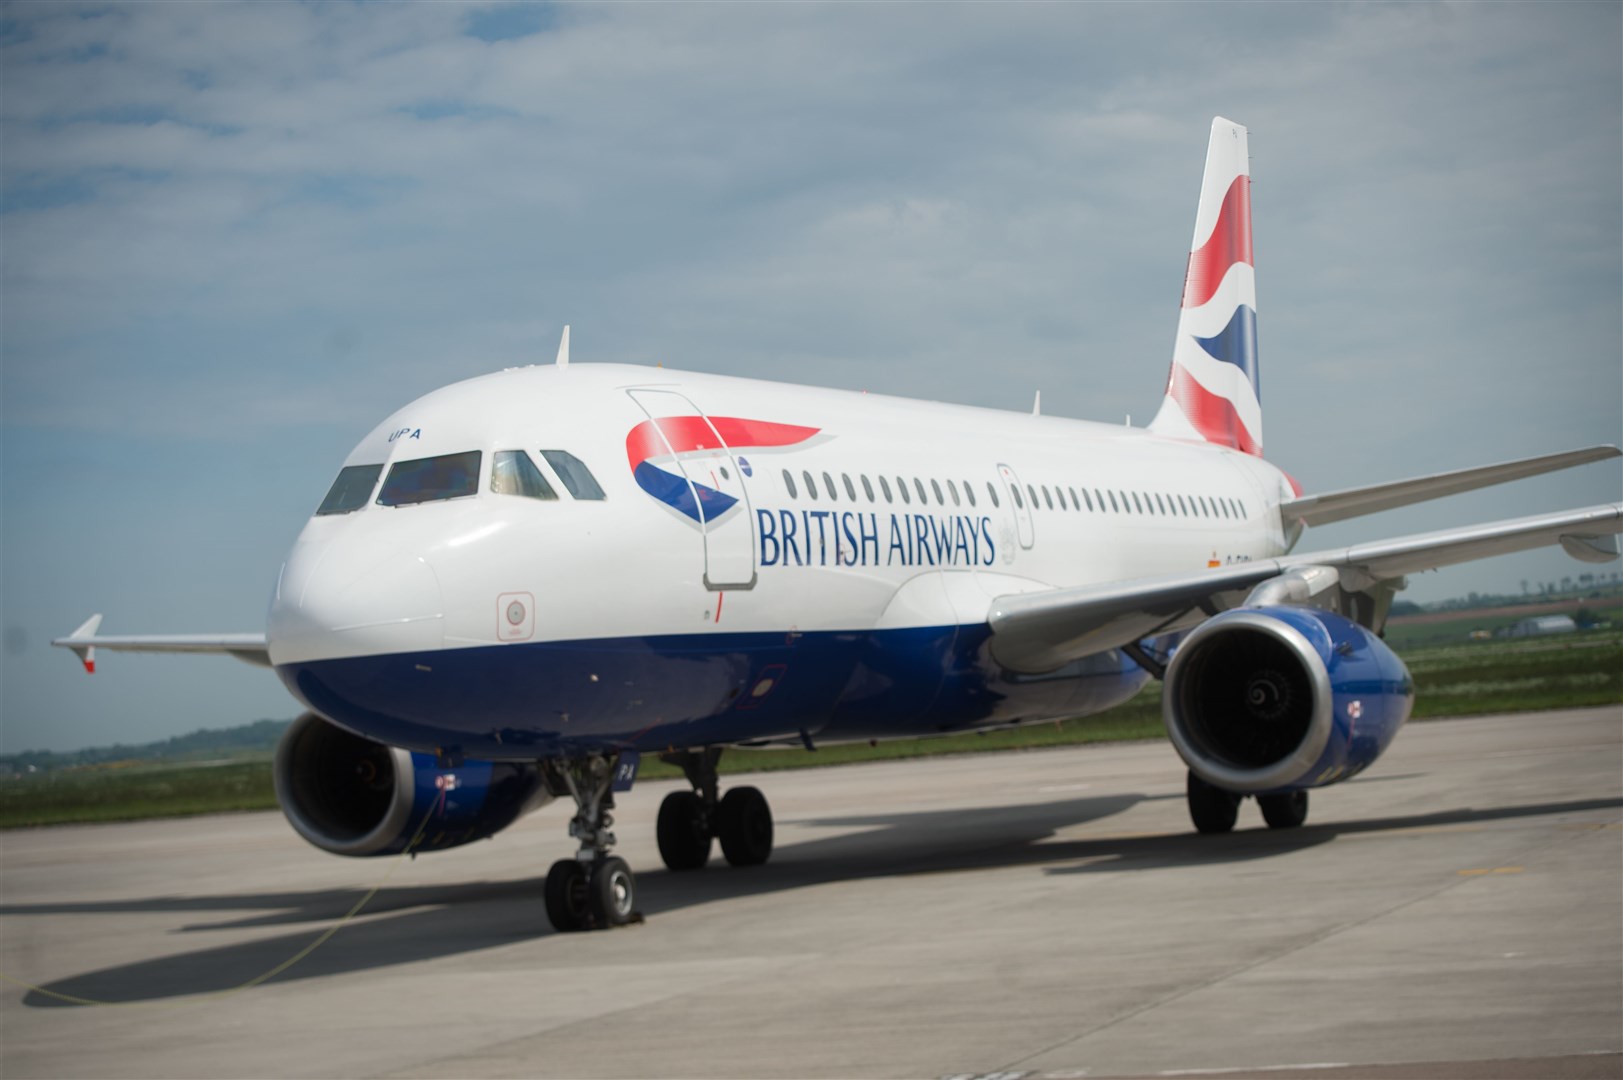 BA's Inverness-Heathrow connection has been suspended.